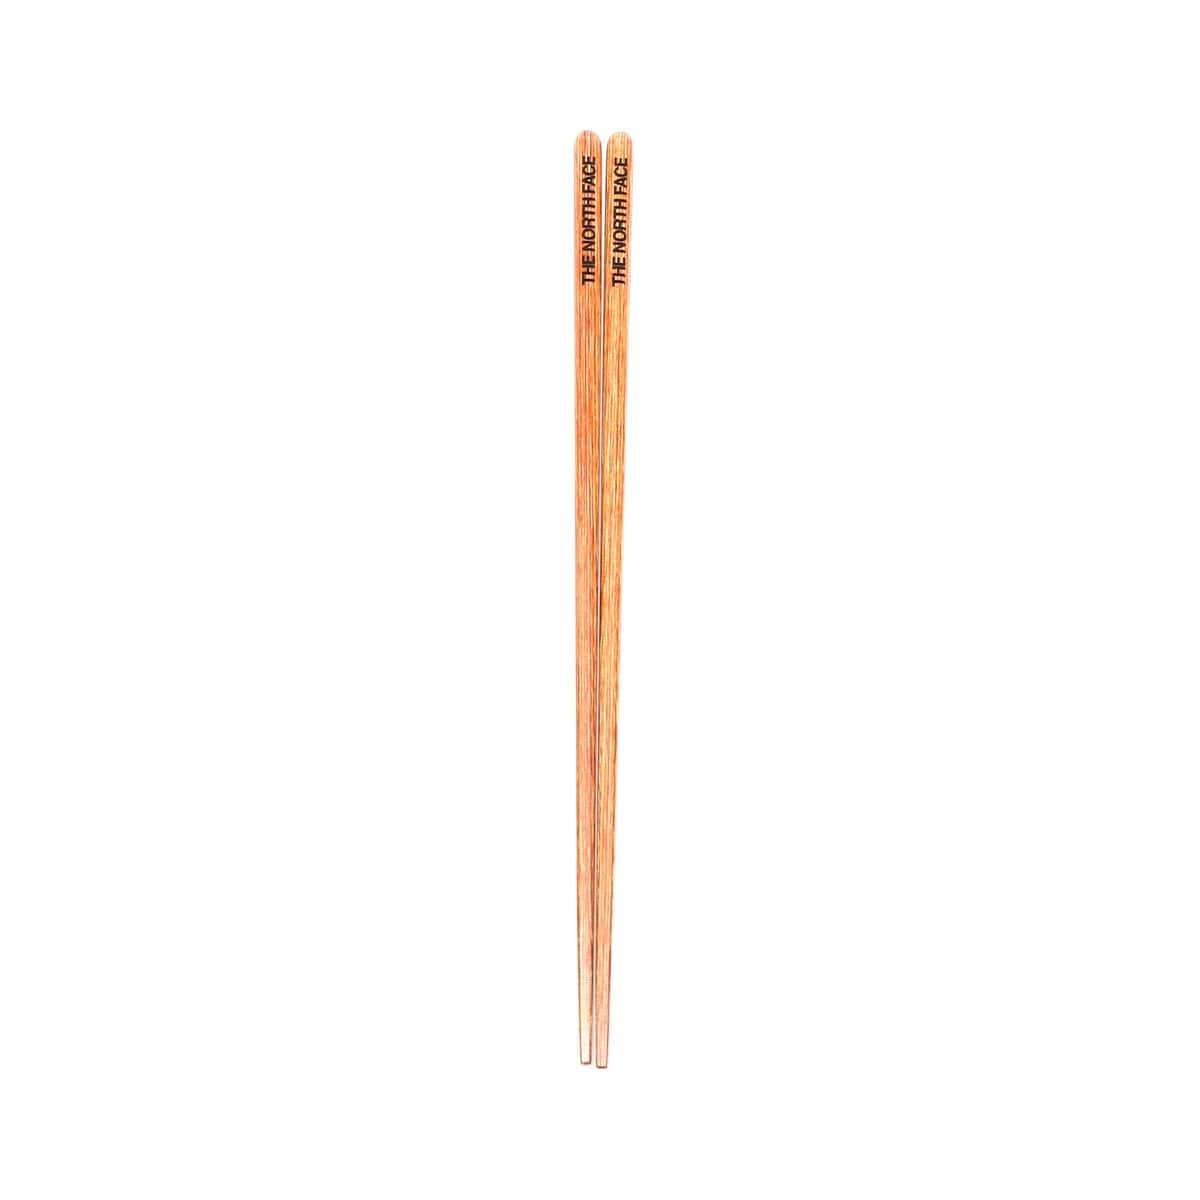 THE NORTH FACE LAND ARMS STICKS NATURAL 22SS-I